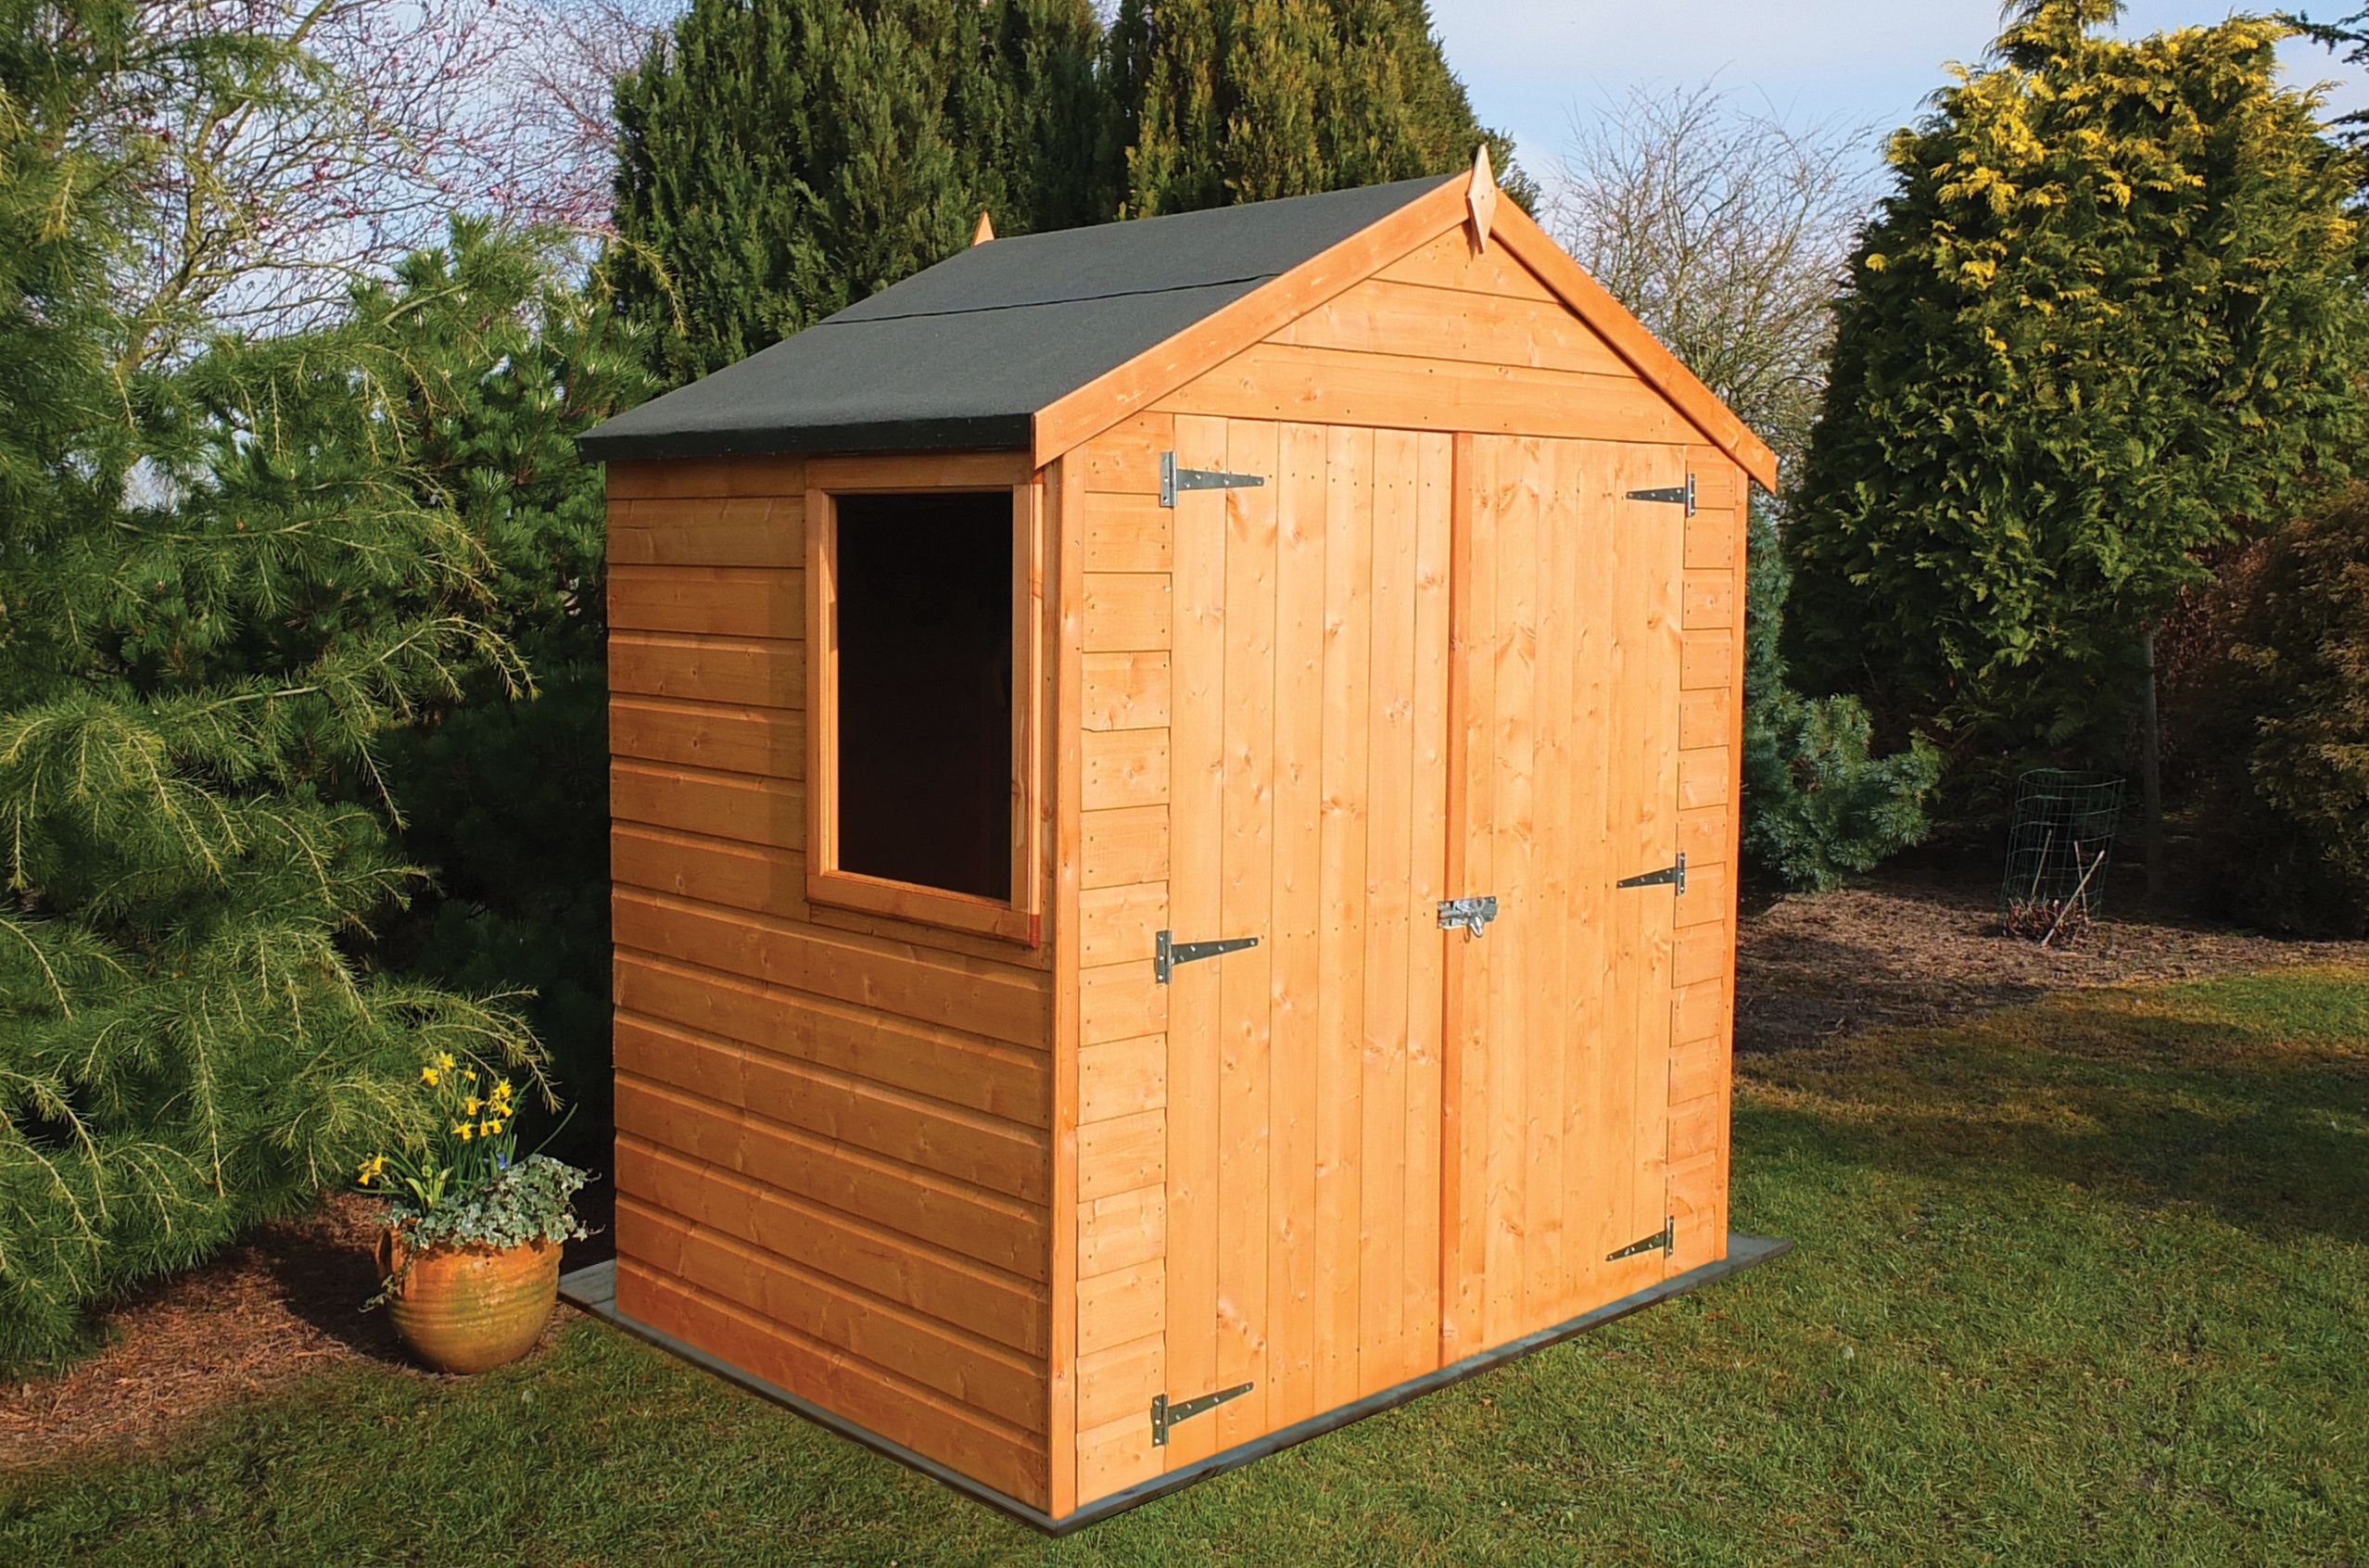 Shire Apex Shiplap Dip Treated Double Door Shed - 6 x 4ft